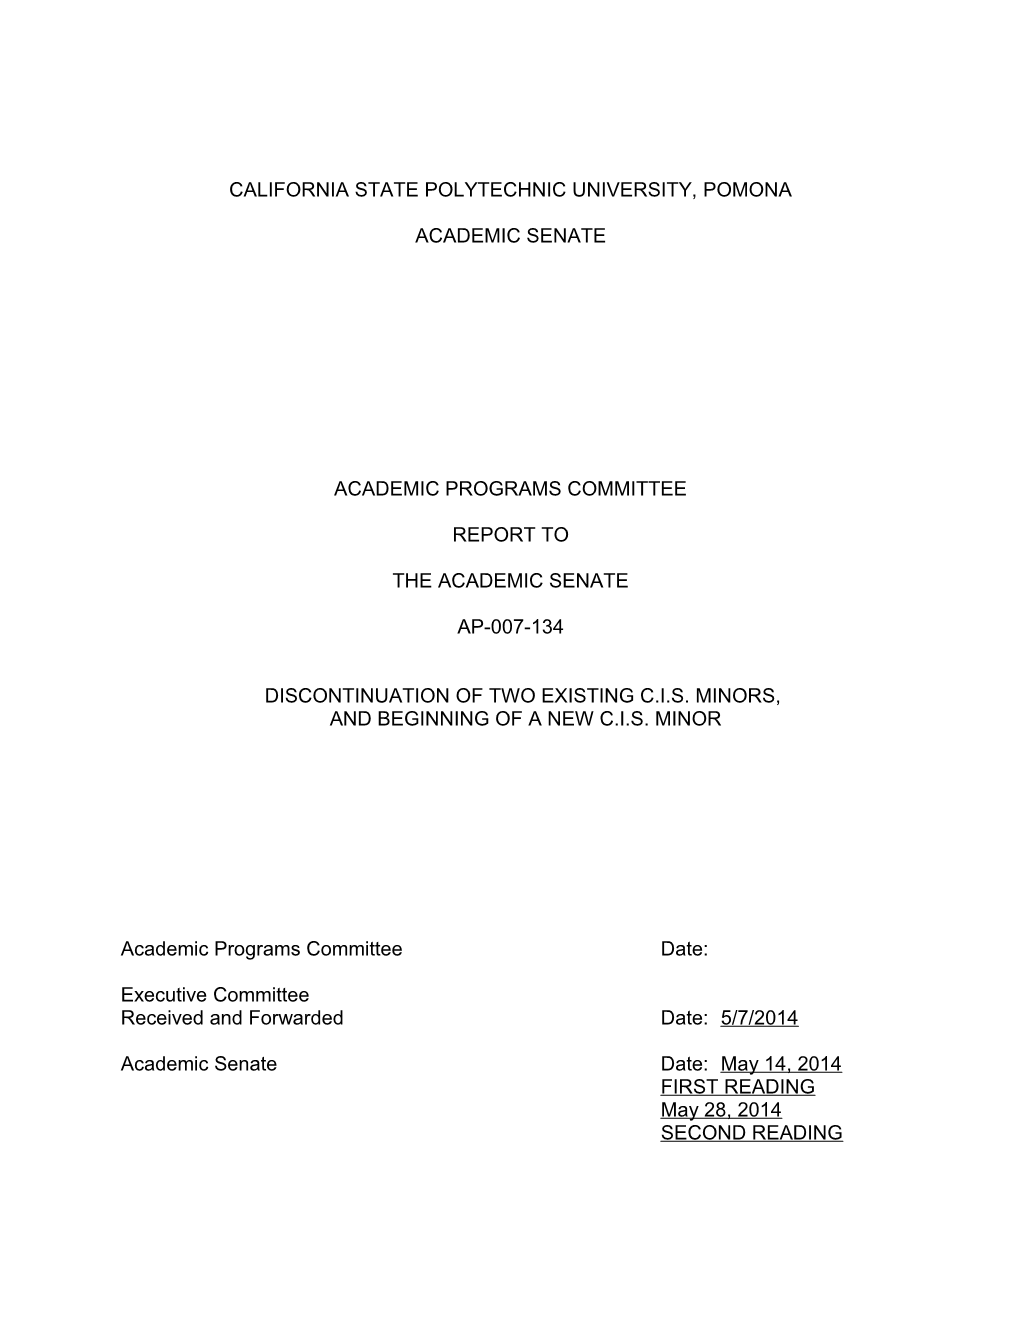 Ap-007-134, Discontinuation of Two Existing C.I.S. Minors, and Beginning